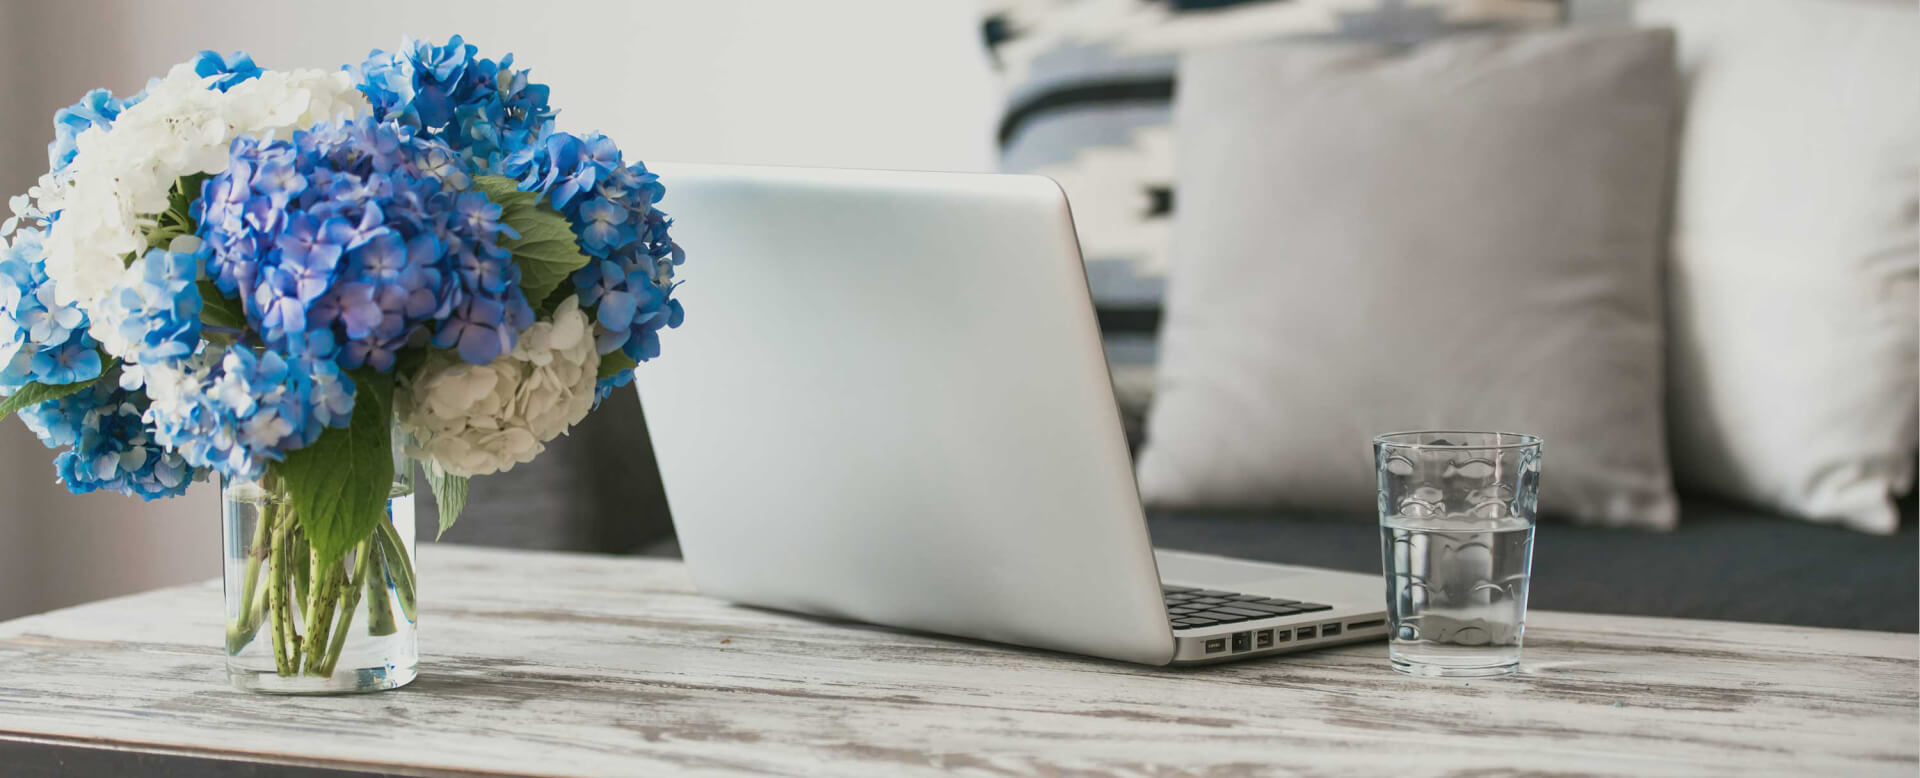 Blue and White flowers on a table with a silver laptop